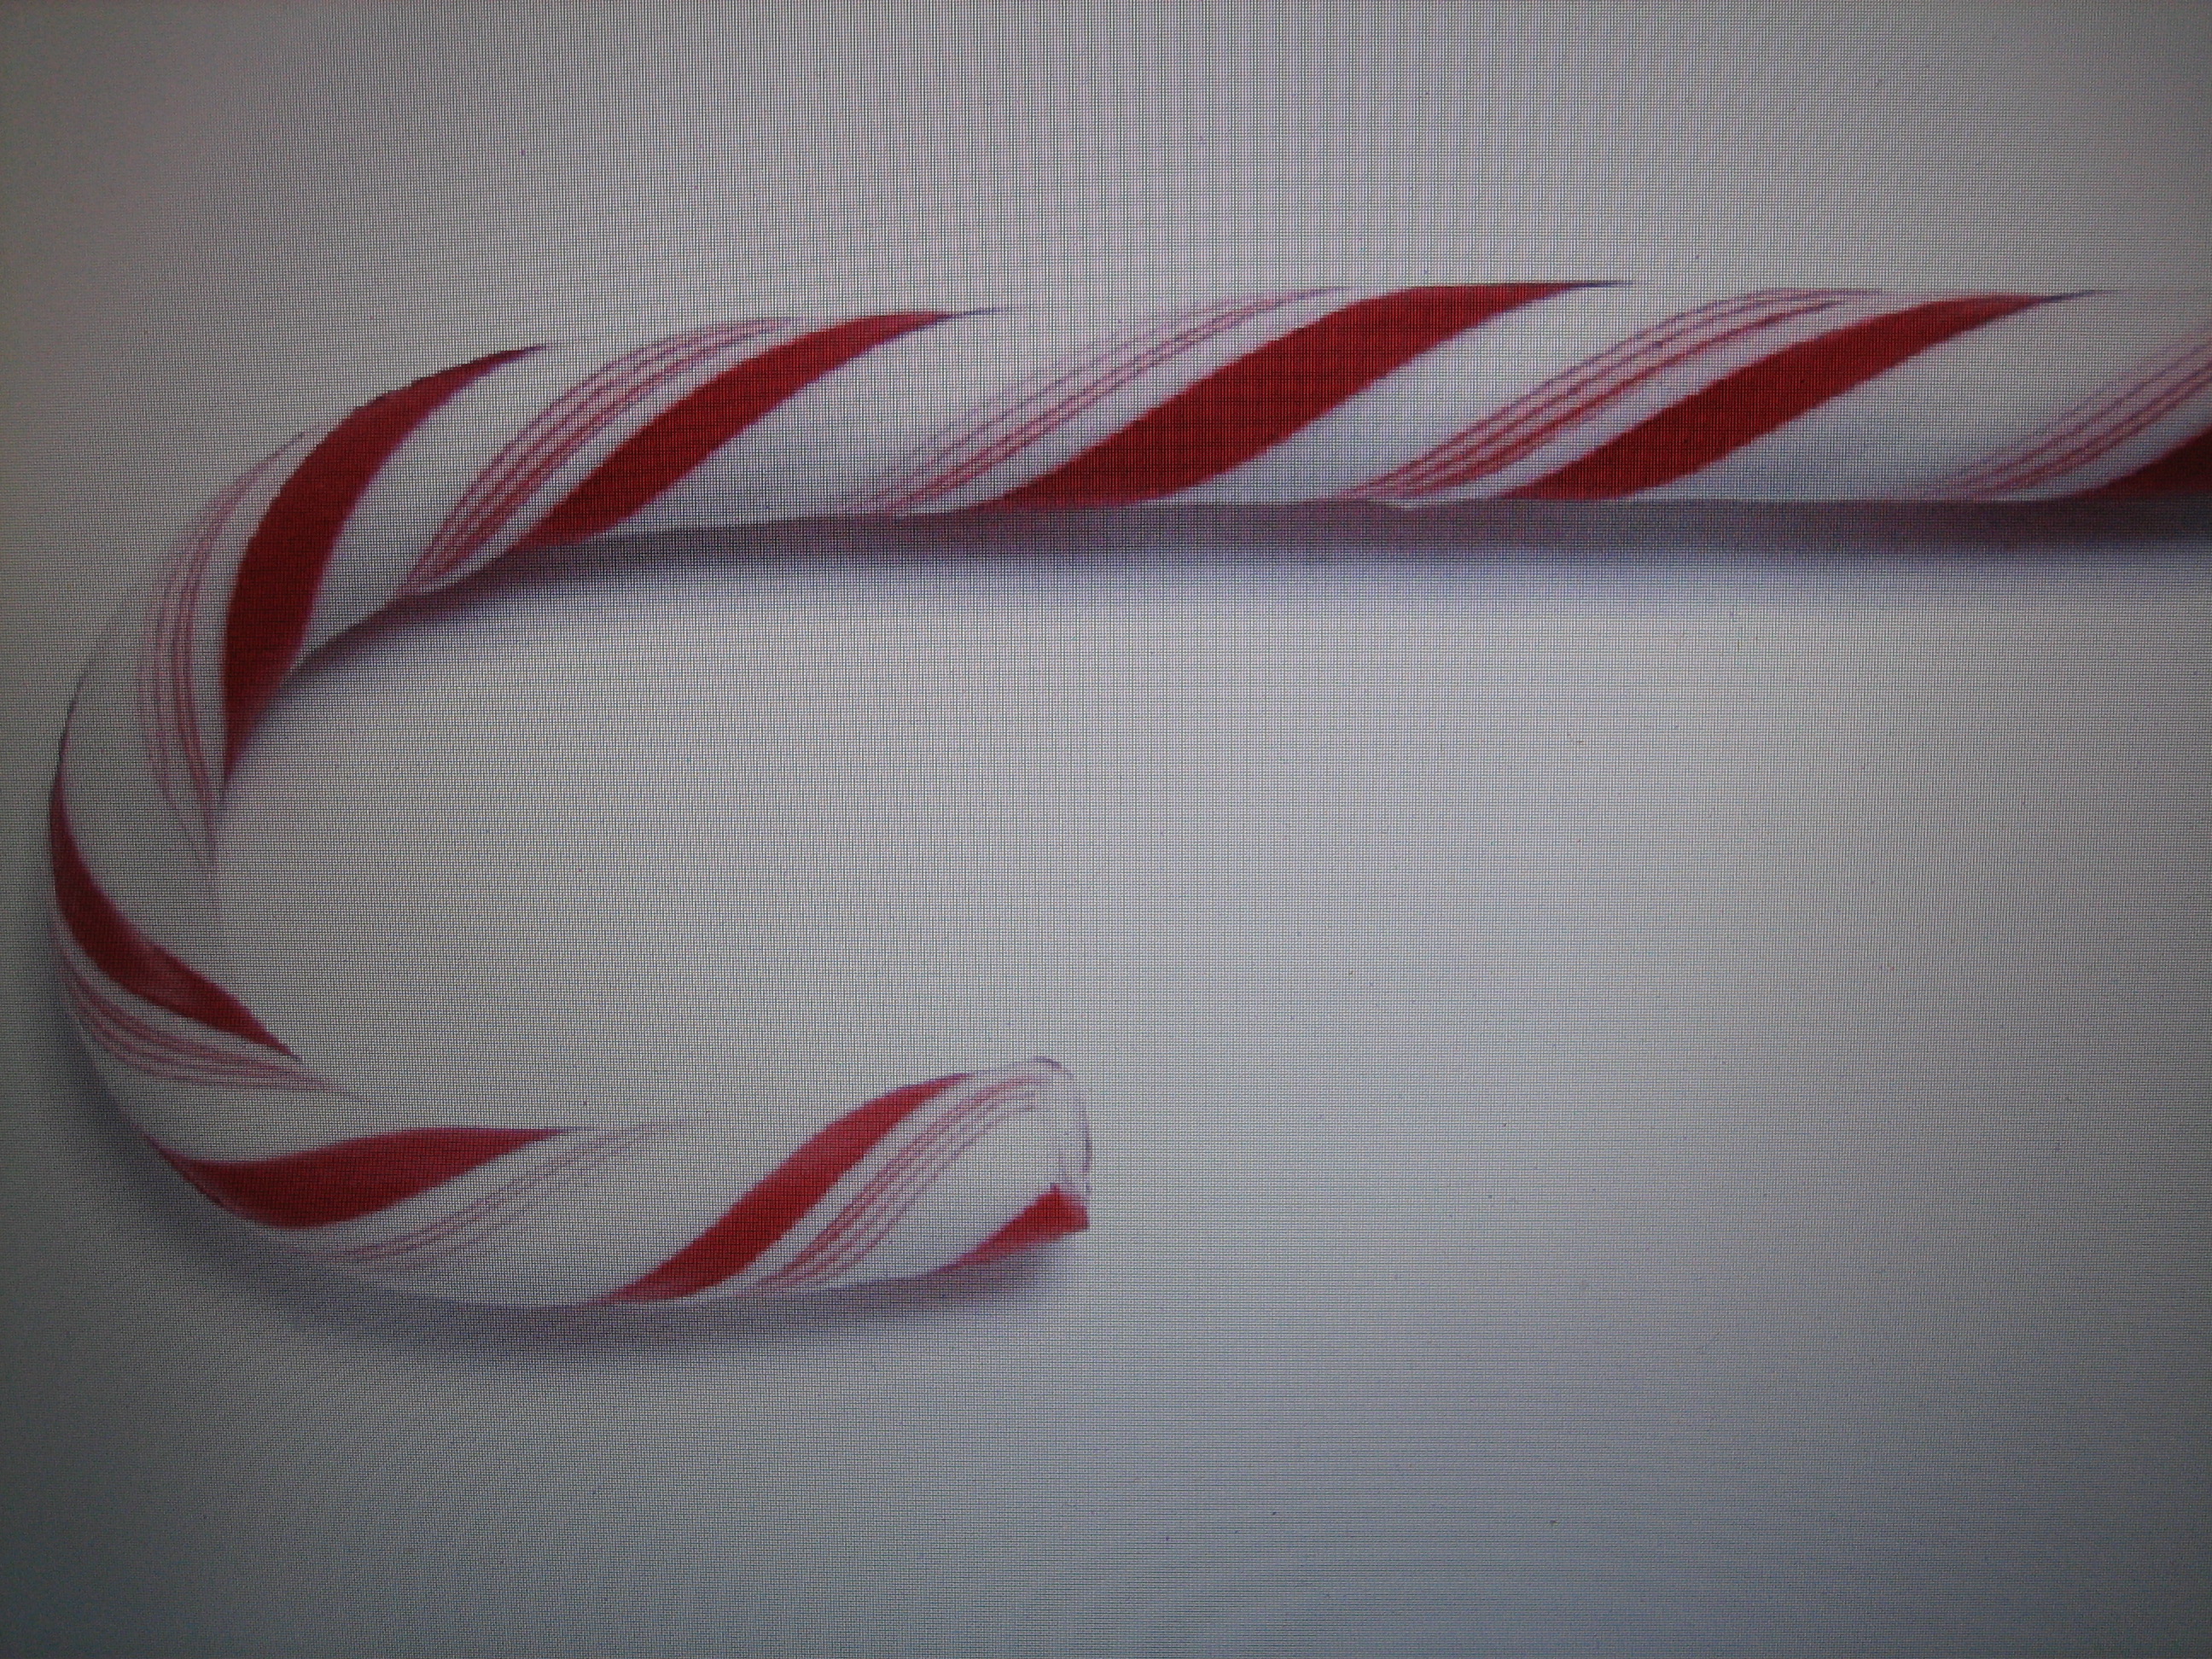   Candy canes